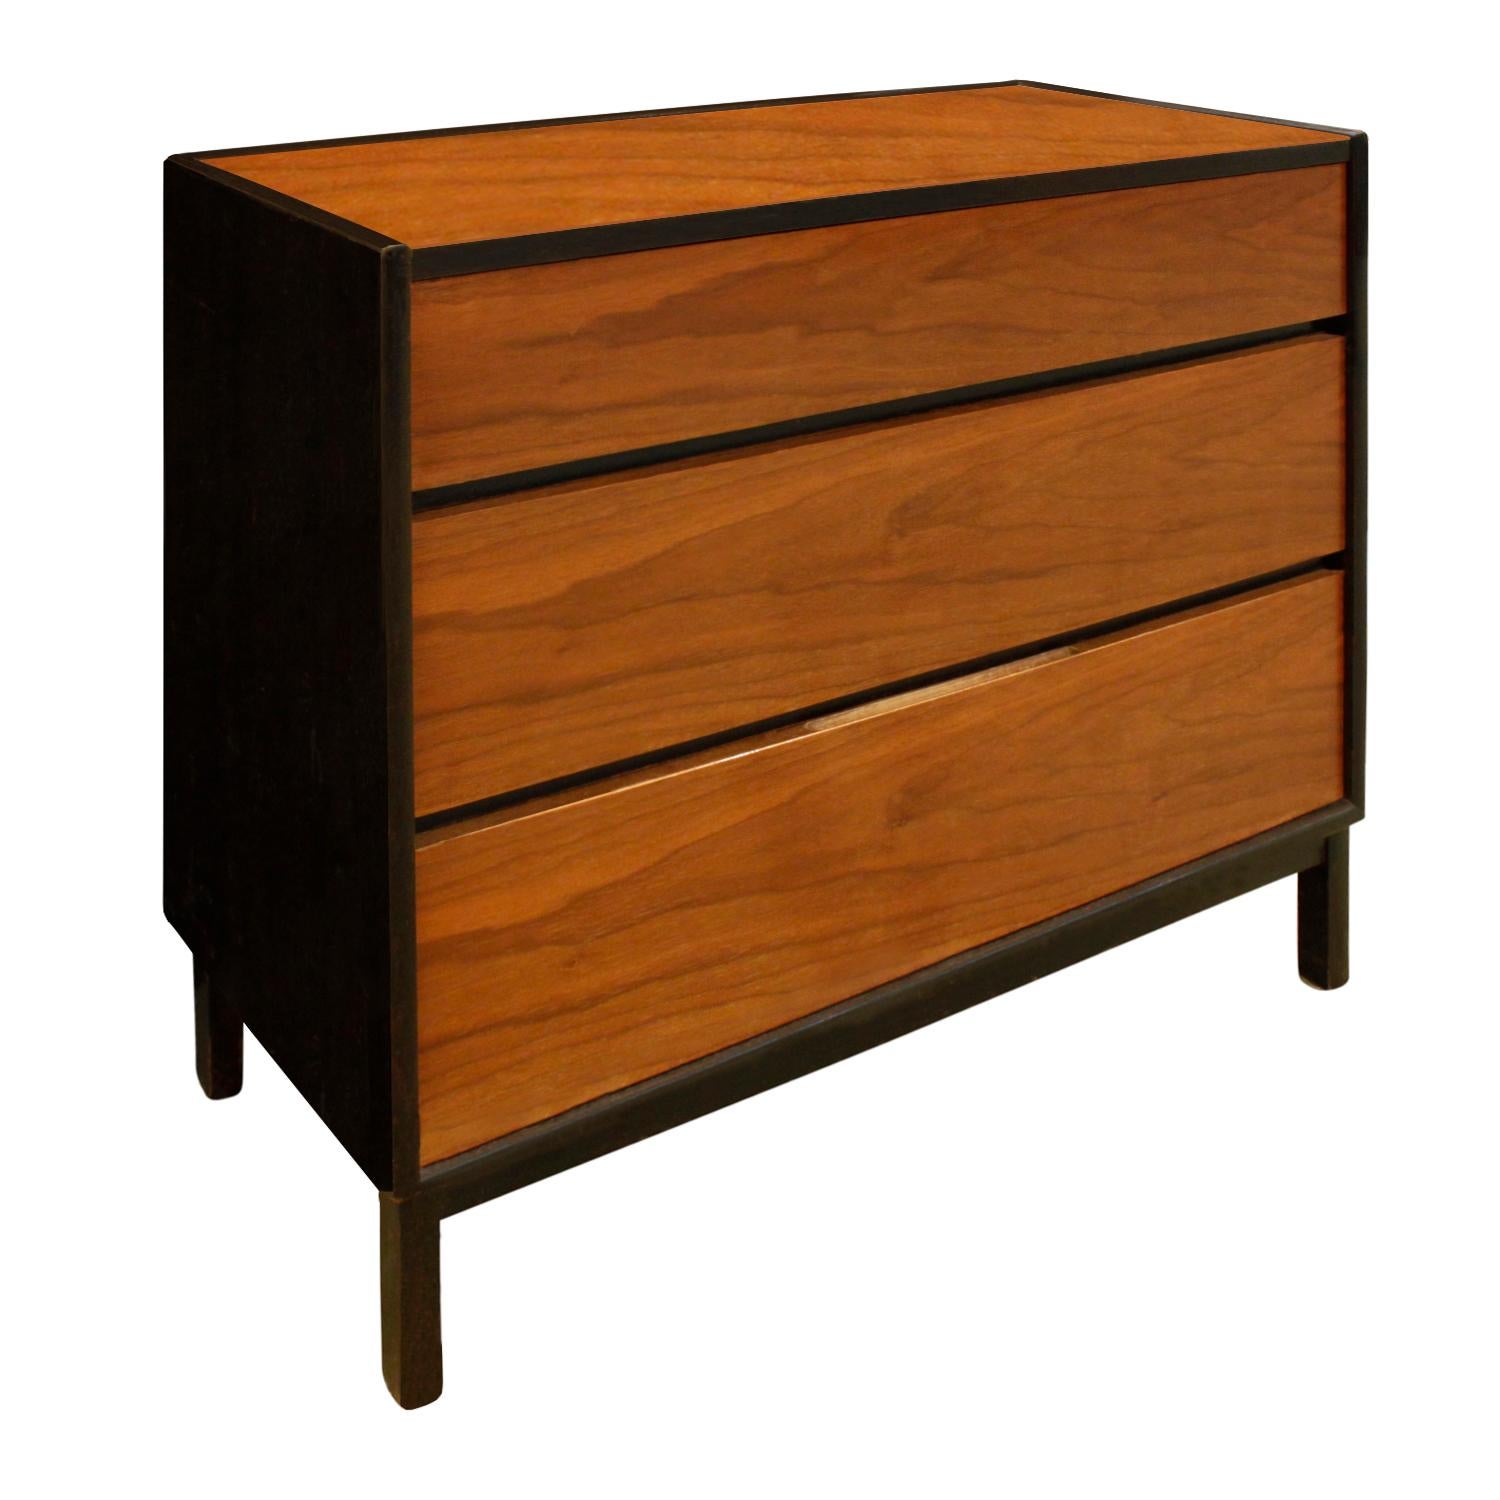 Pair of clean line bedside tables / chests model no. 500 in teak and dark mahogany with 3 drawers by Edward Wormley for Dunbar, 1960s (signed with Dunbar tags). These are beautifully crafted in luxurious materials.